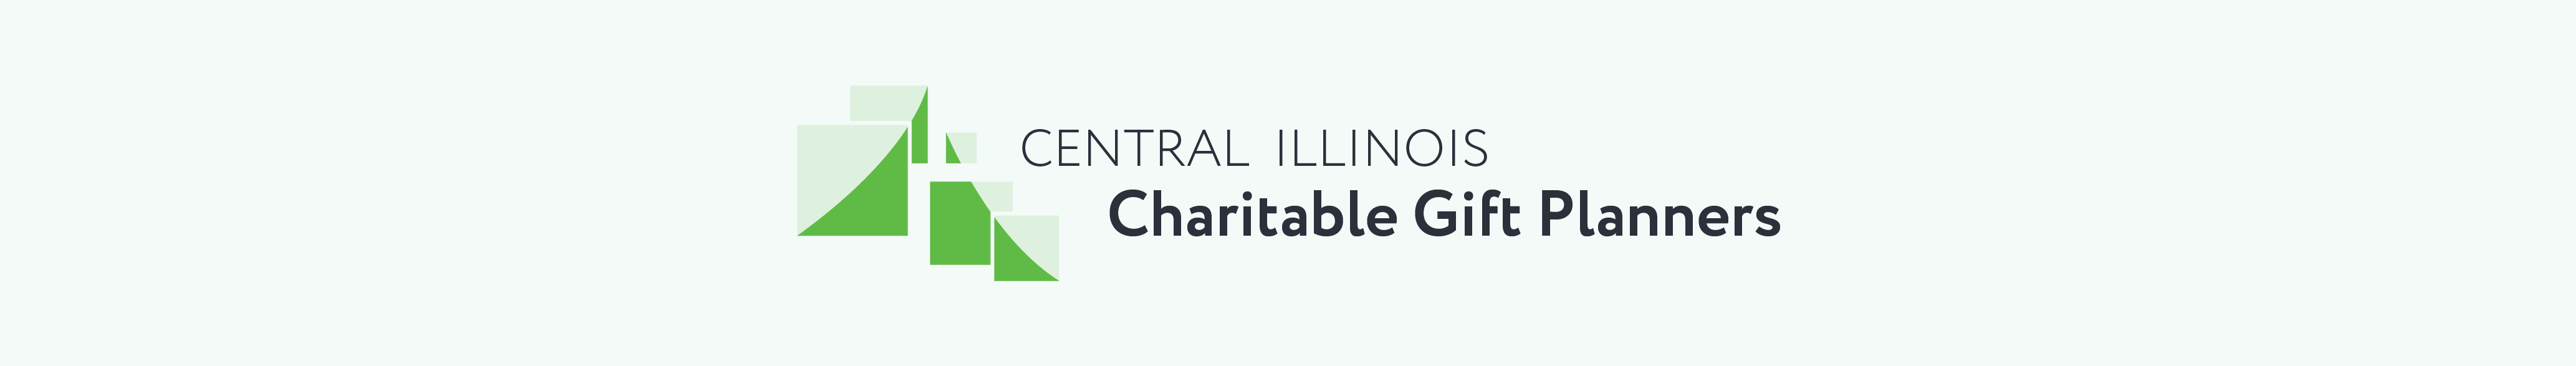 Central Illinois Charitable Gift Planners Logo